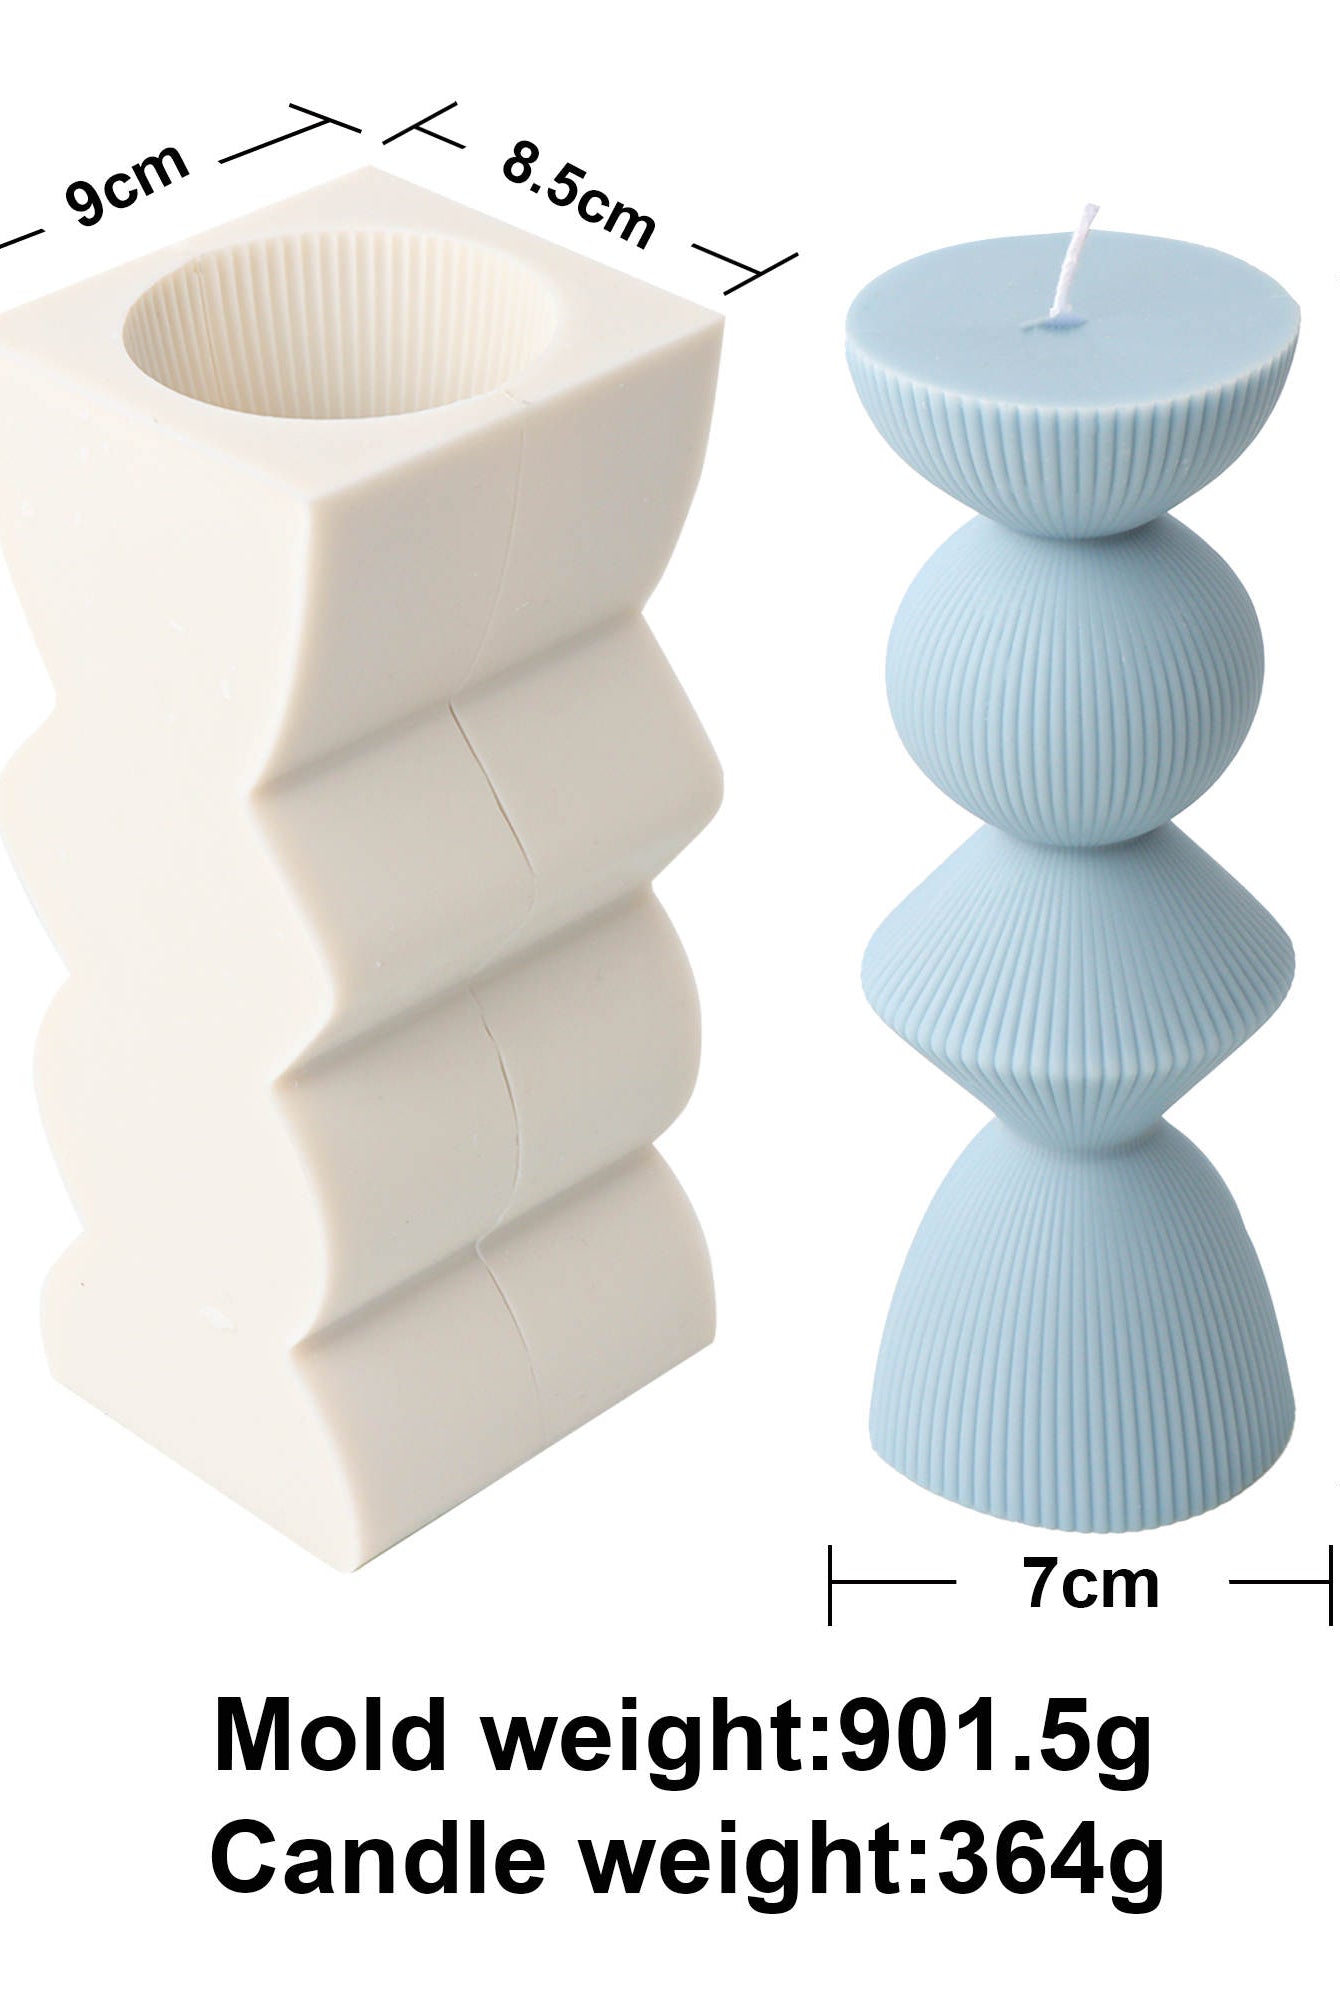 Ribbed Geometric Pillar Candle Mould 2 - Silicone Mould, Mold for DIY Candles. Created using candle making kit with cotton candle wicks and candle colour chips. Using soy wax for pillar candles. Sold by Myka Candles Moulds Australia